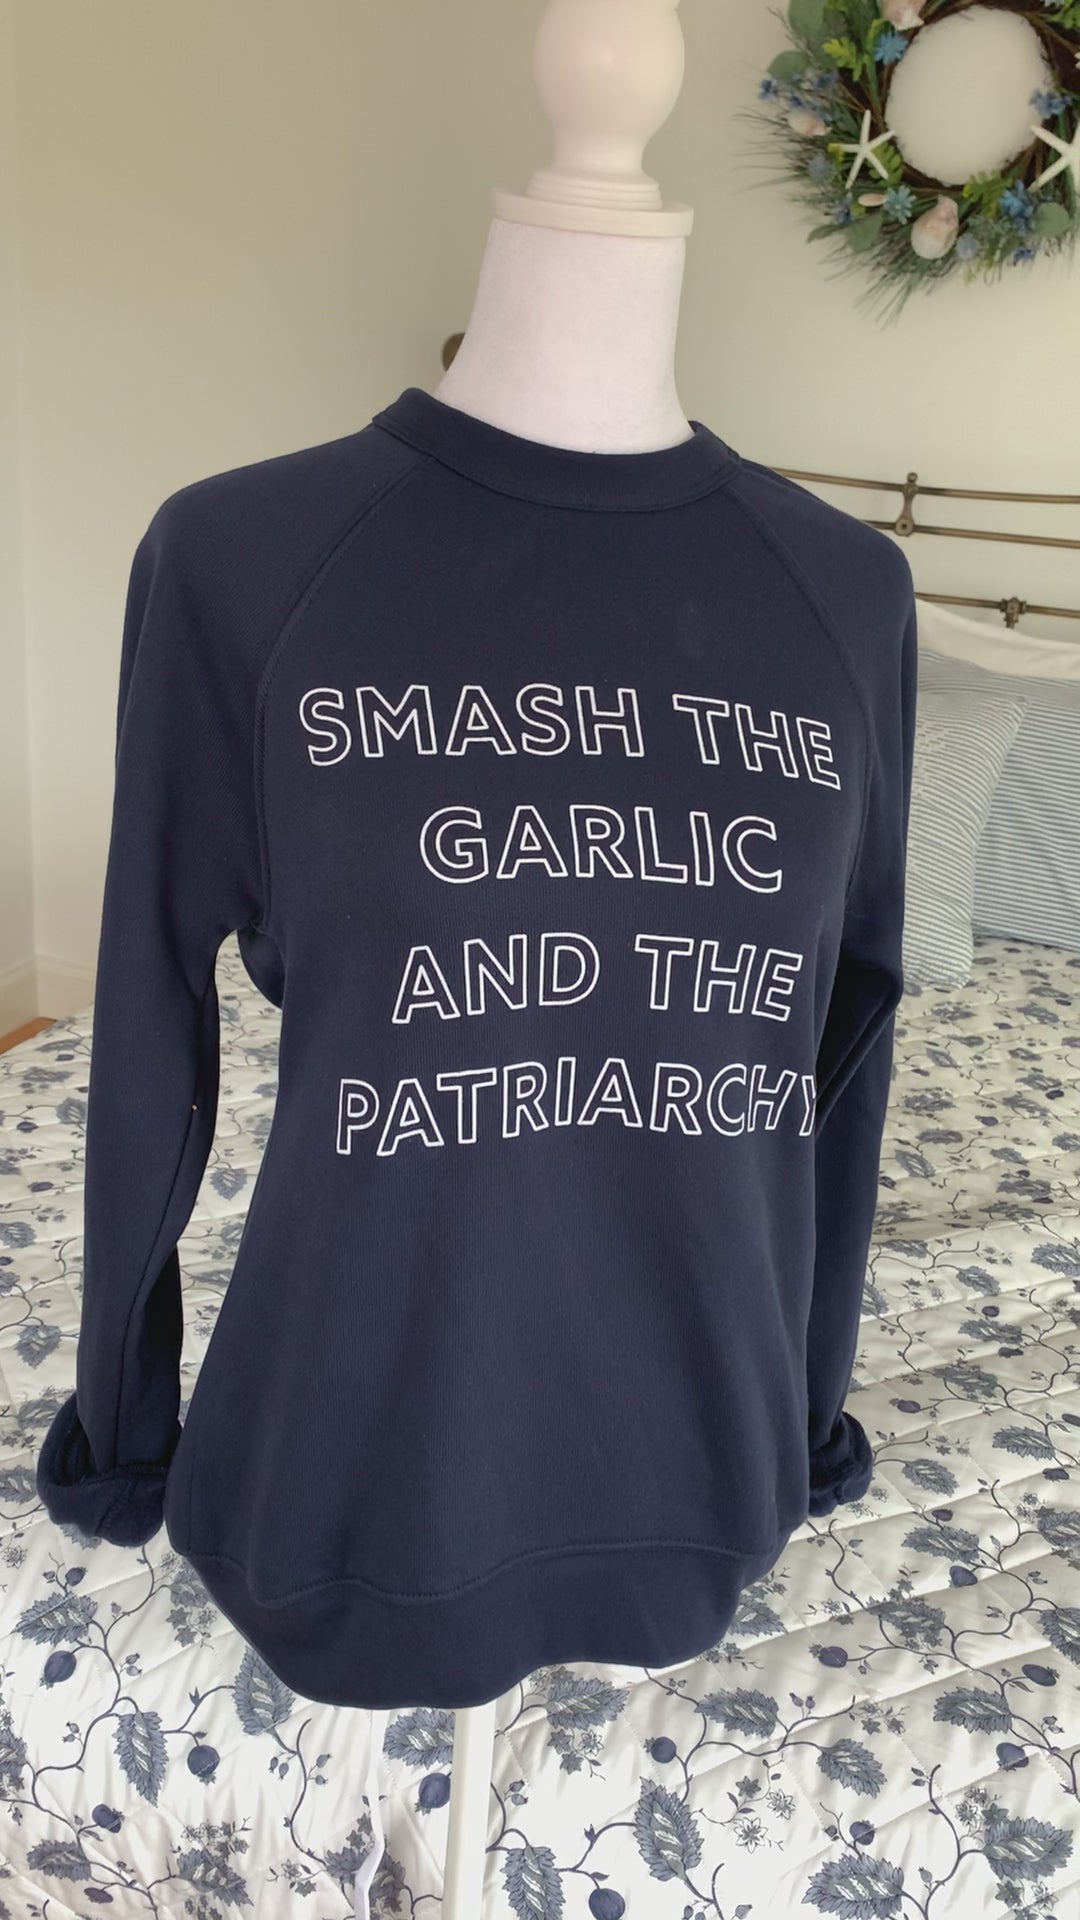 A navy blue crewneck that reads "Smash the Garlic and the Patriarchy" hangs on a manikin